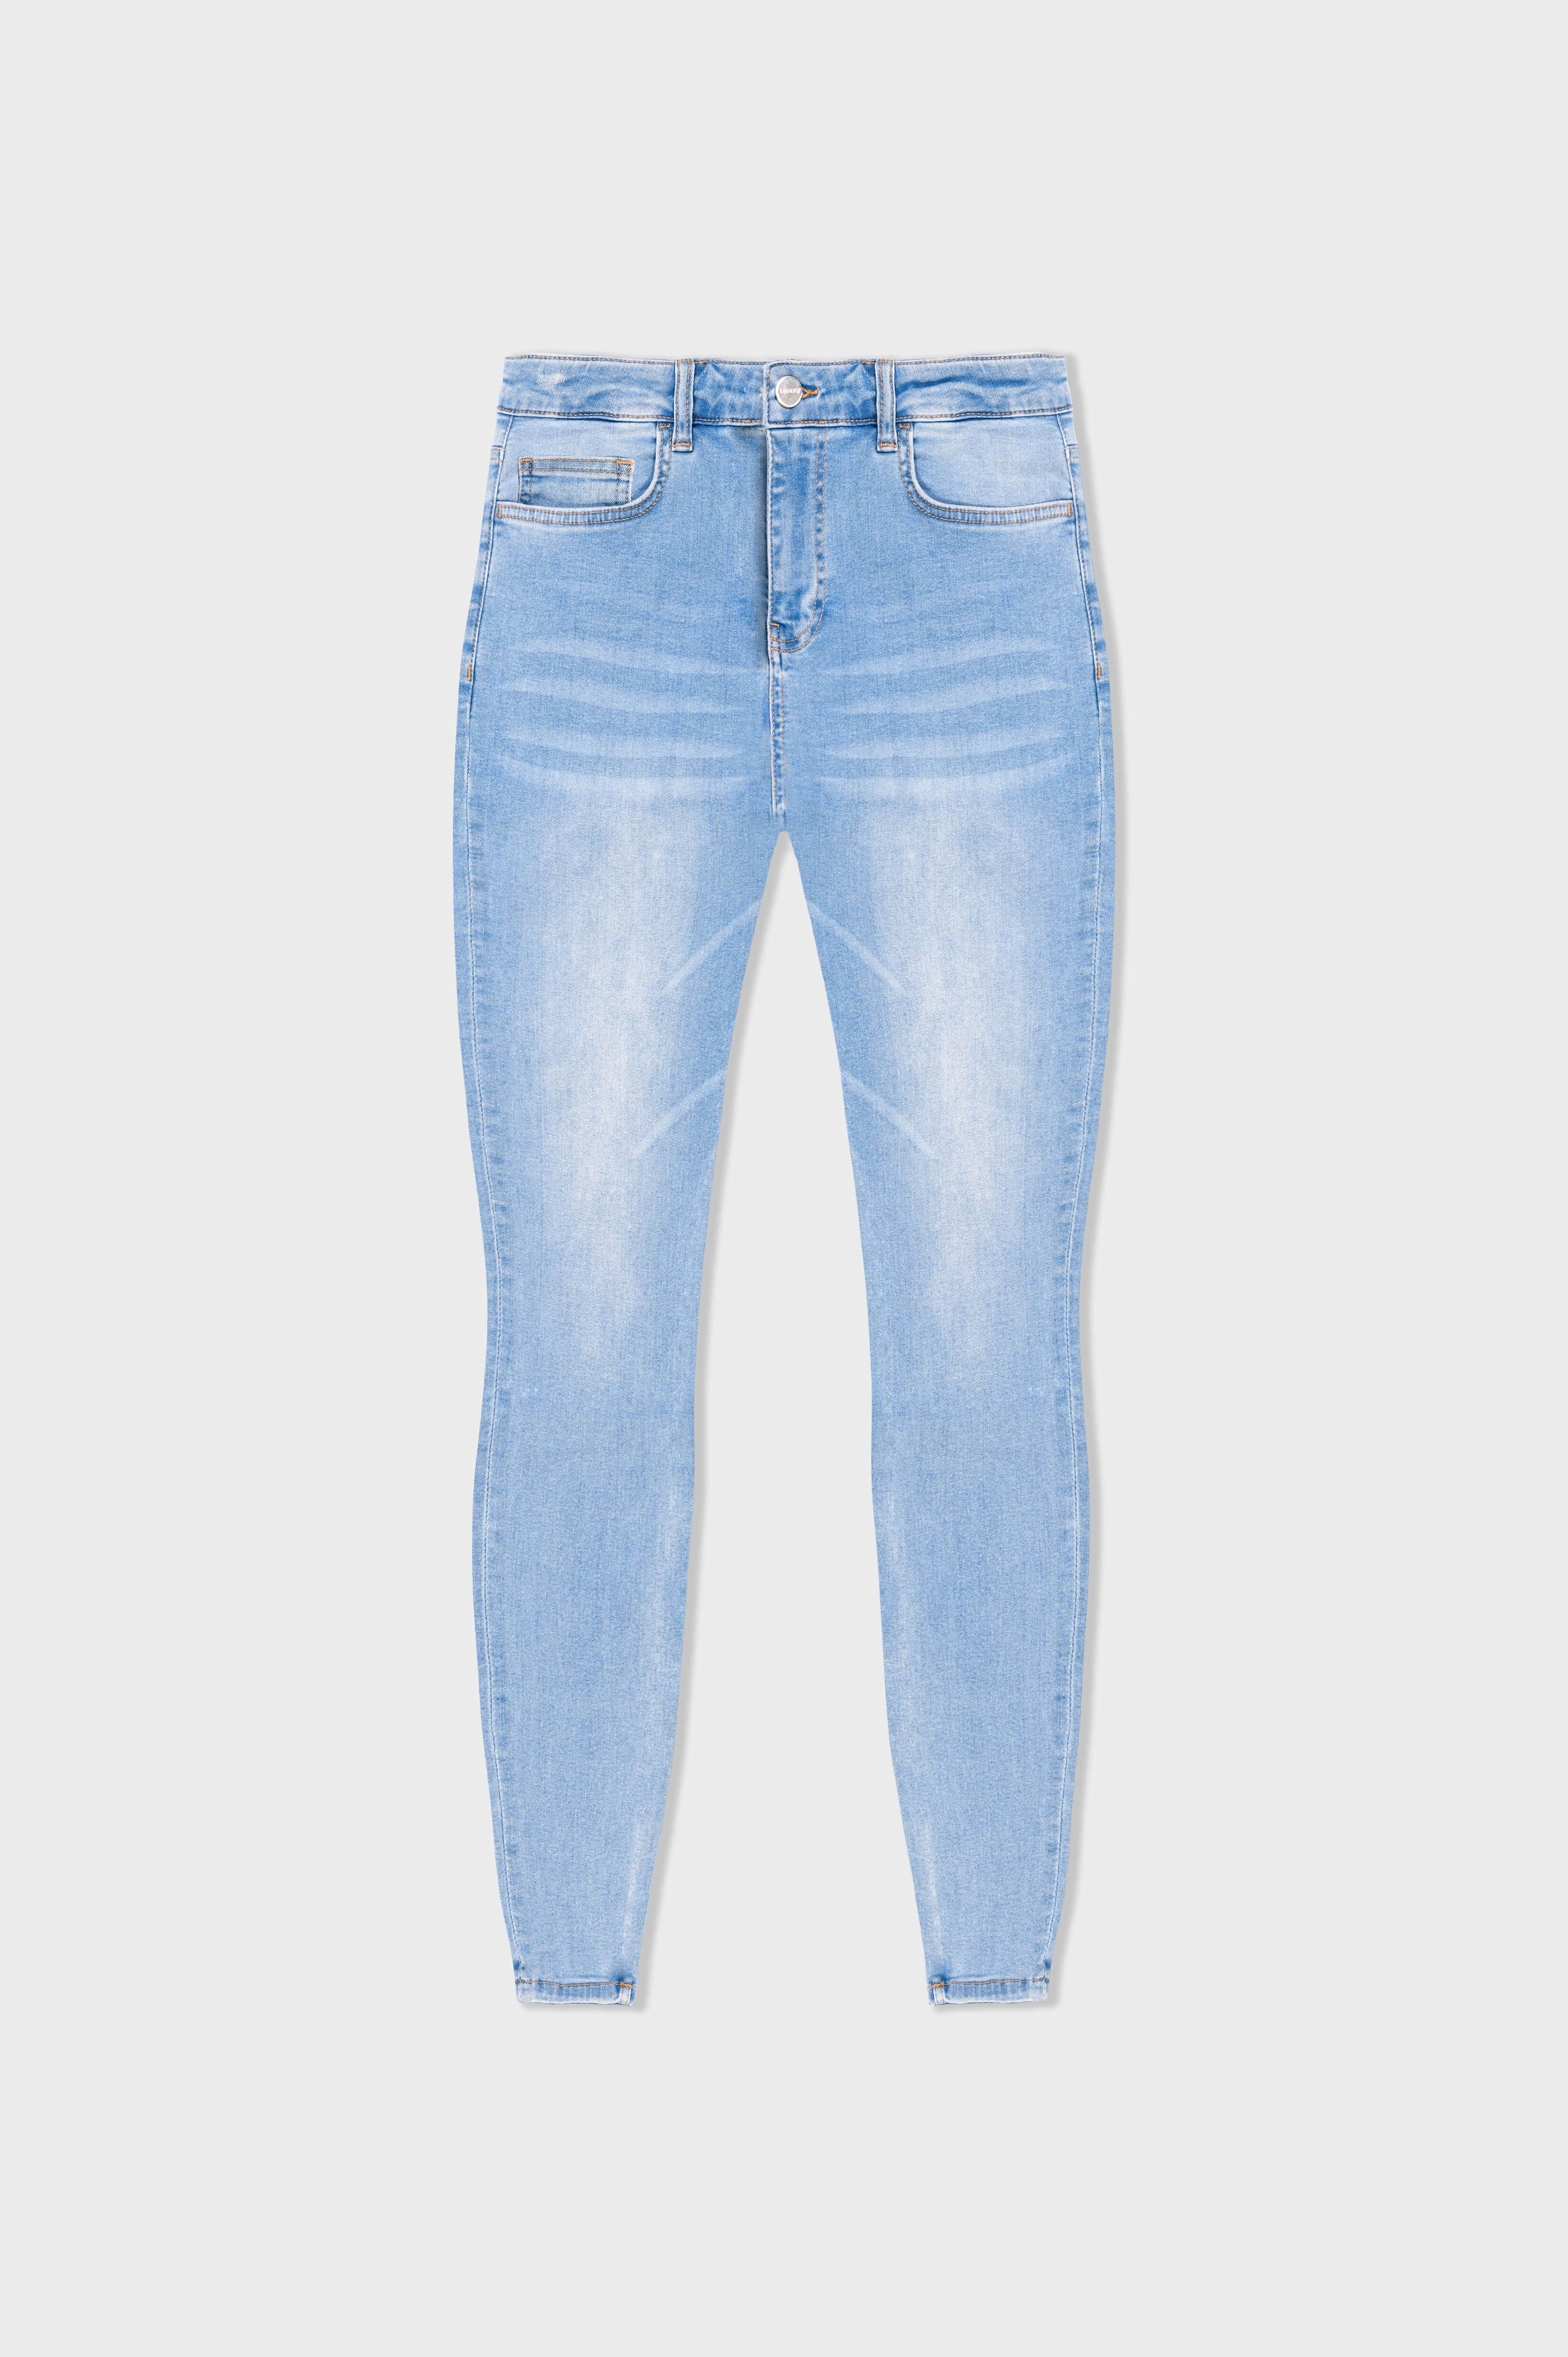 Legend London Jeans - spray on LIGHT BLUE JEANS - NON RIPPED